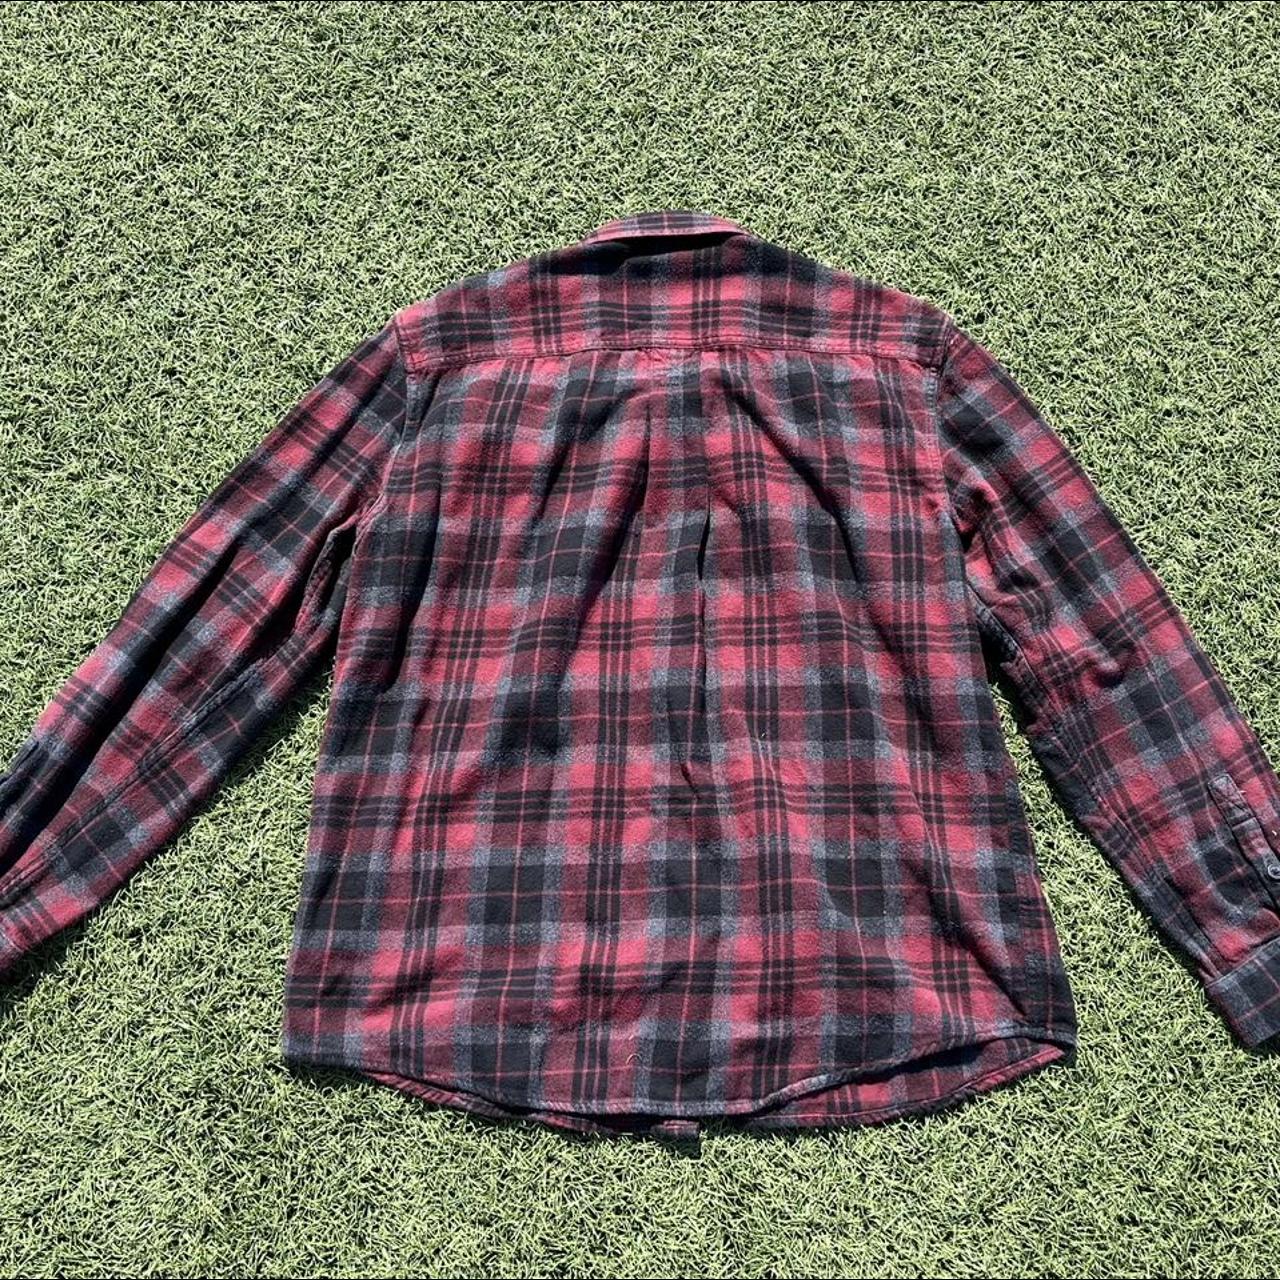 Product Image 3 - G.H. Bass - Flannel 👕

Size